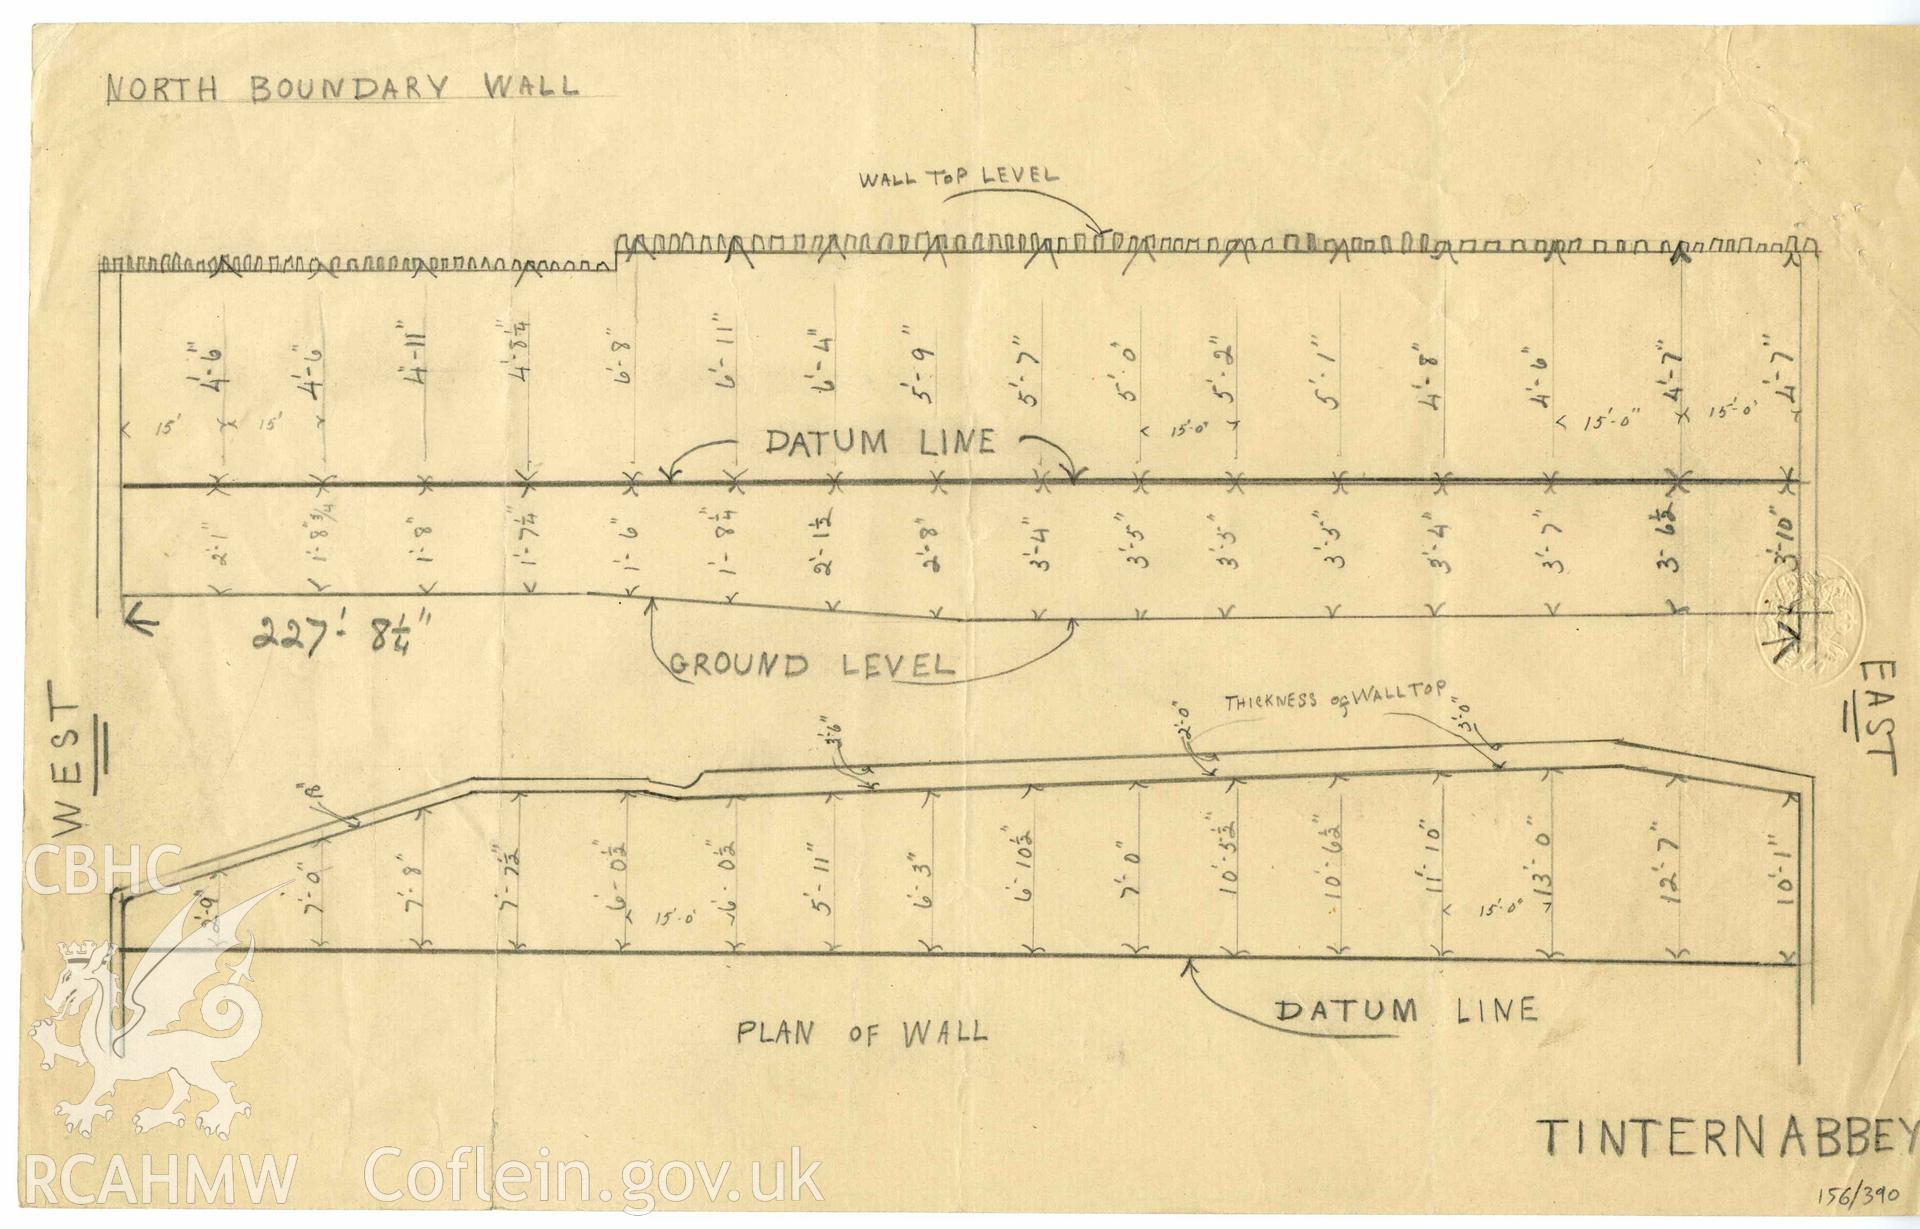 Cadw Guardianship monument drawing, plan of north boundary wall, Tintern Abbey.